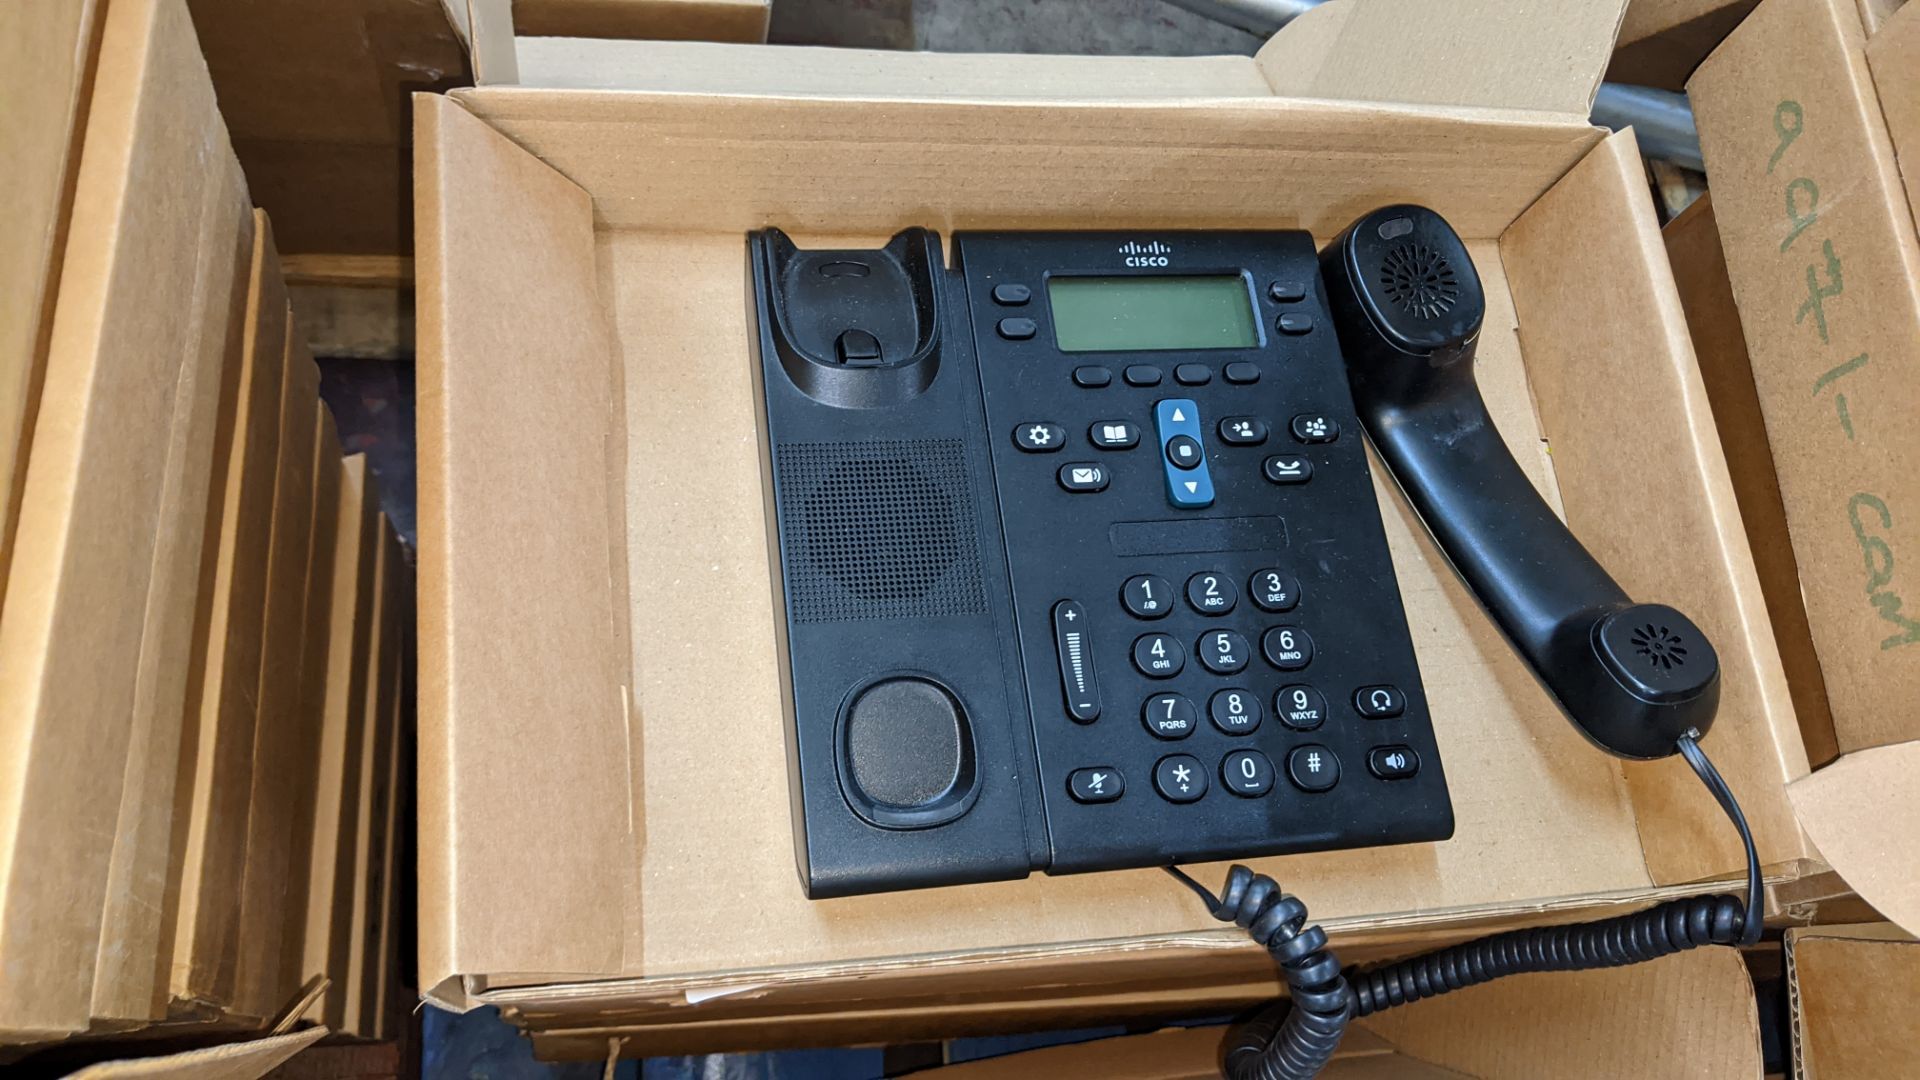 7 off Cisco telephone handsets model CP-6945 - Image 2 of 4